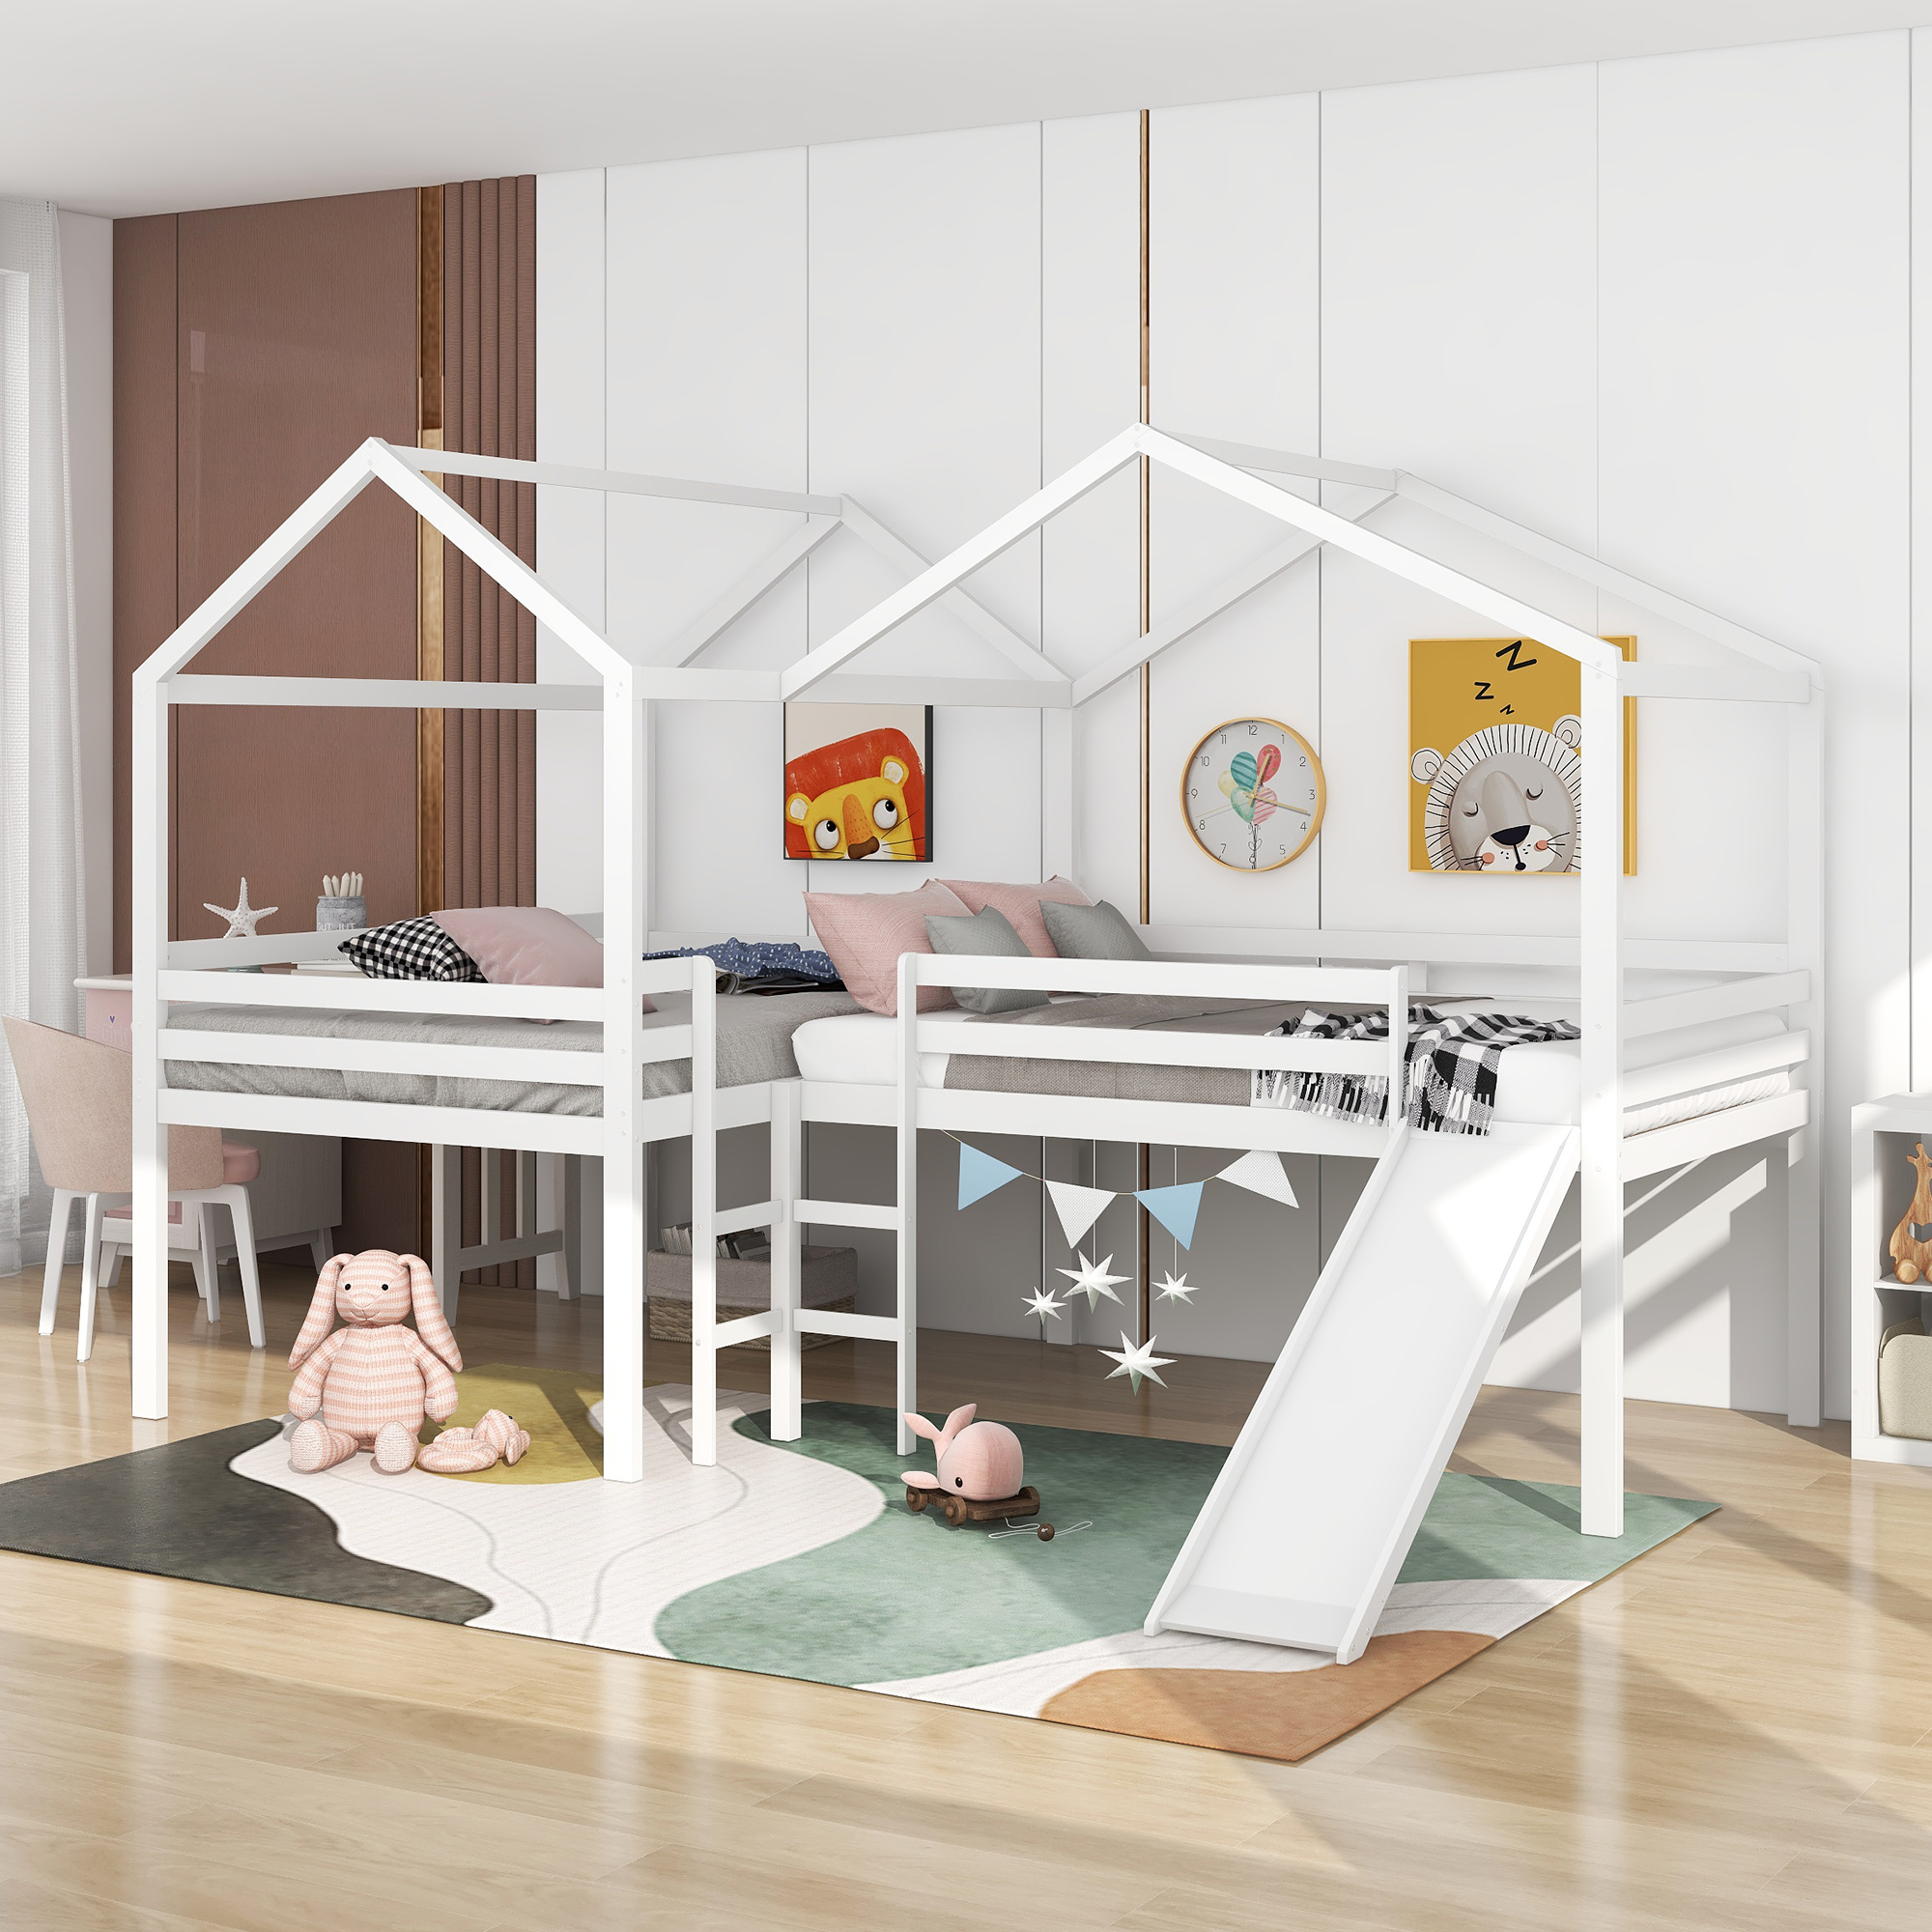 Full size Loft Bed Wood Bed with Roof,Slide,Guardrail,House Bed (White)-Boyel Living